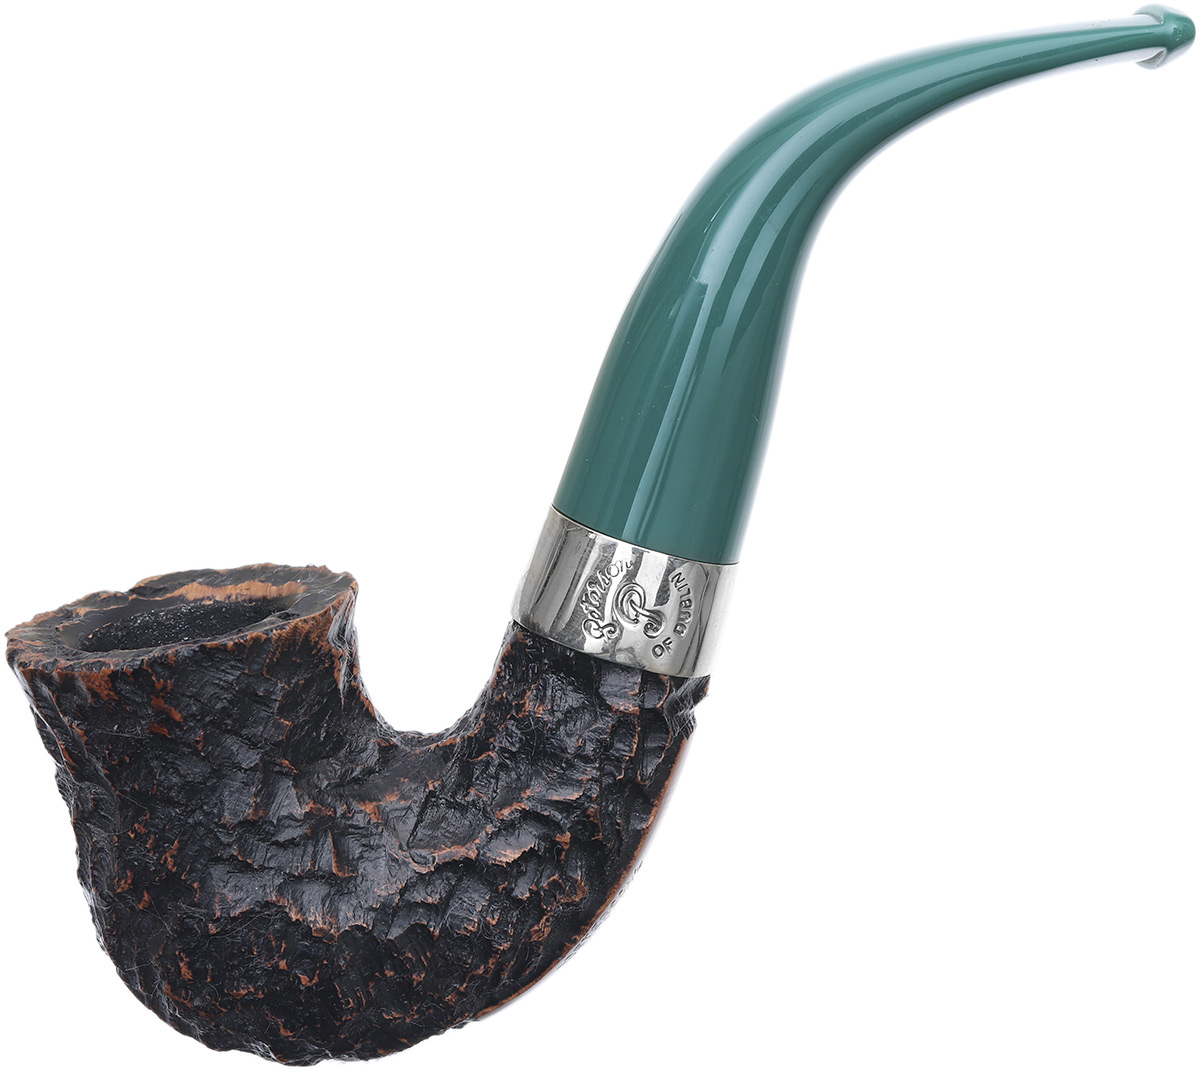 Irish Seconds Rusticated Bent Dublin with Nickel Band Fishtail (3)